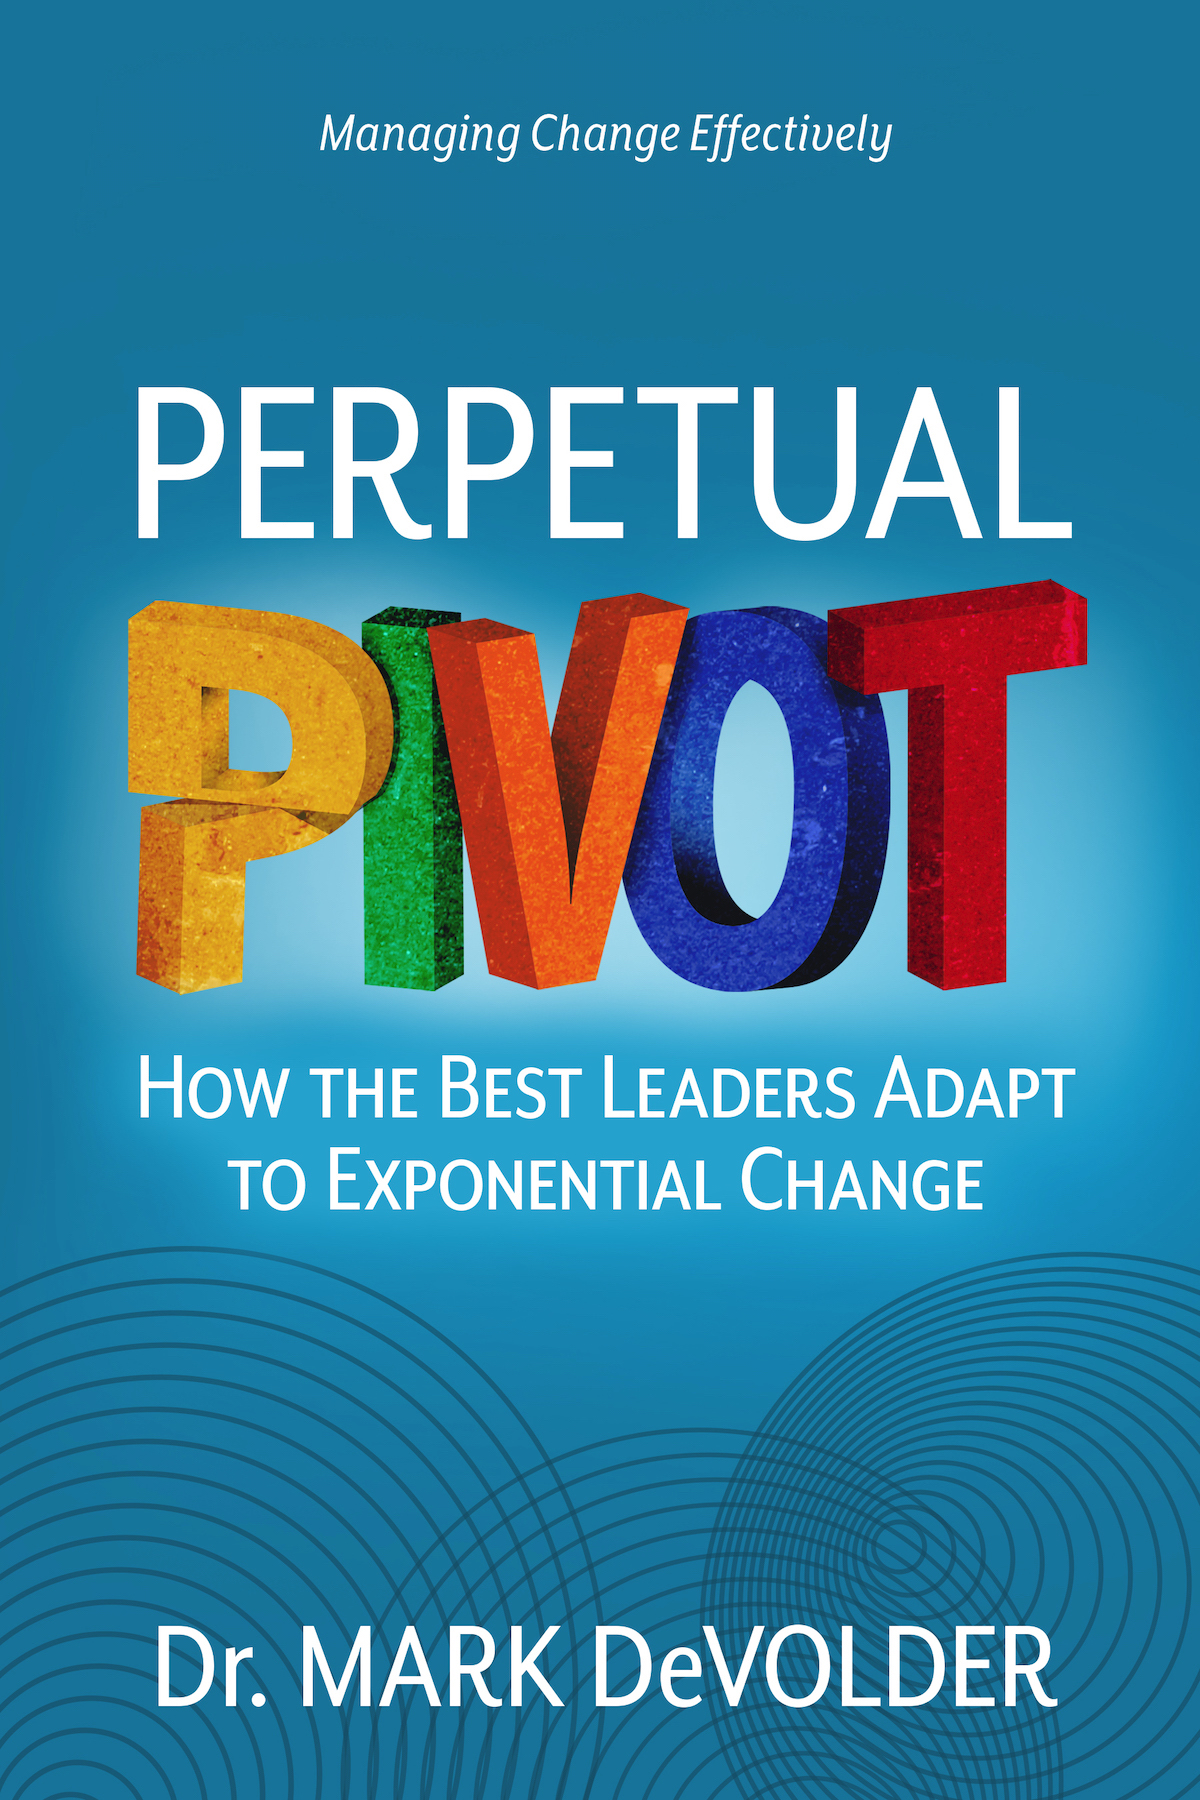 Perpetual Pivot: How the Best Leaders Adapt to Exponential Change